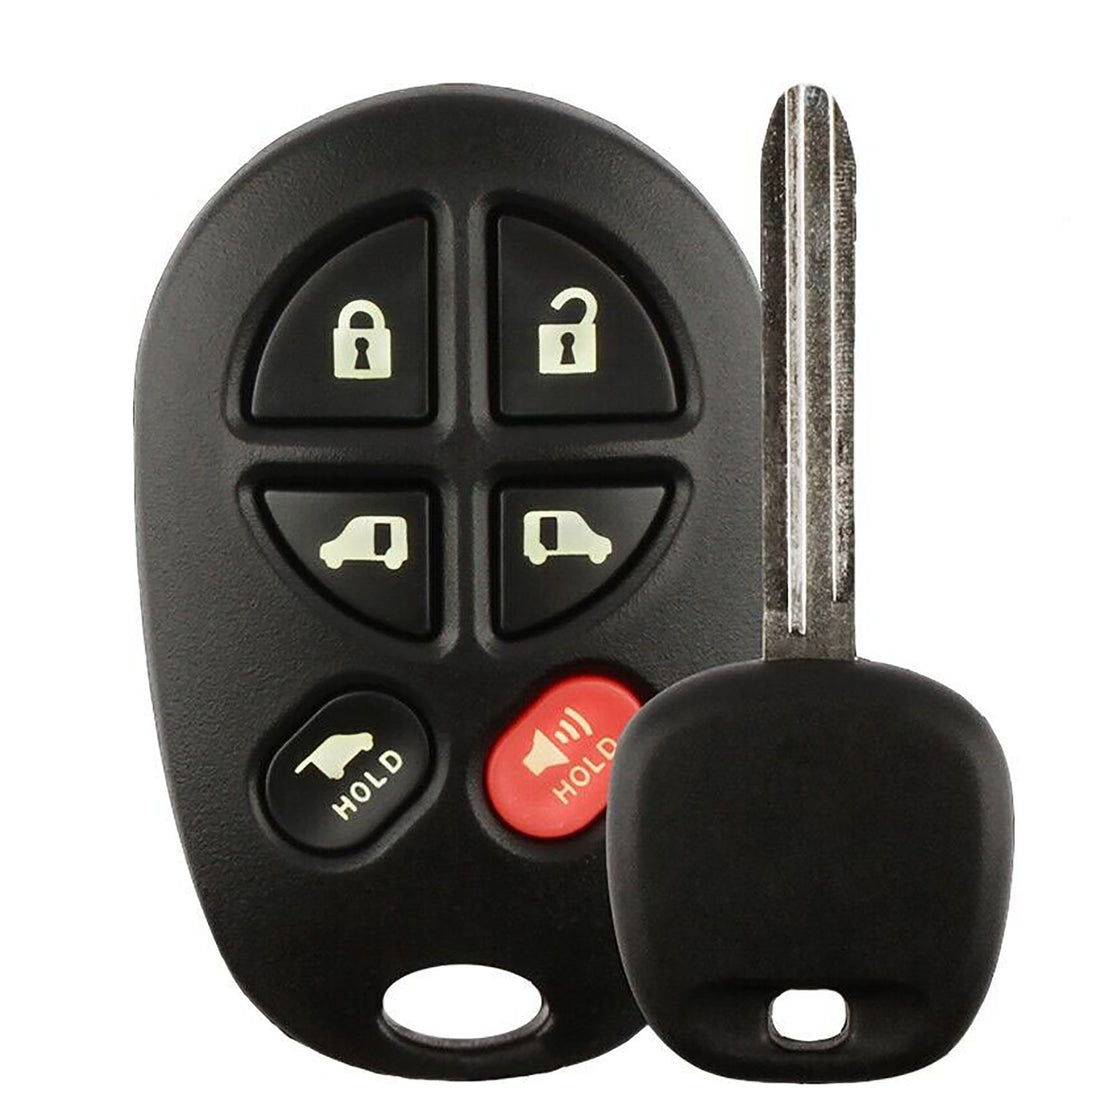 1x New Replacement Transponder Key Remote Compatible with & Fit For 2011-2014 Toyota Sienna - G chip - MPN TOY44G-PT-C-08